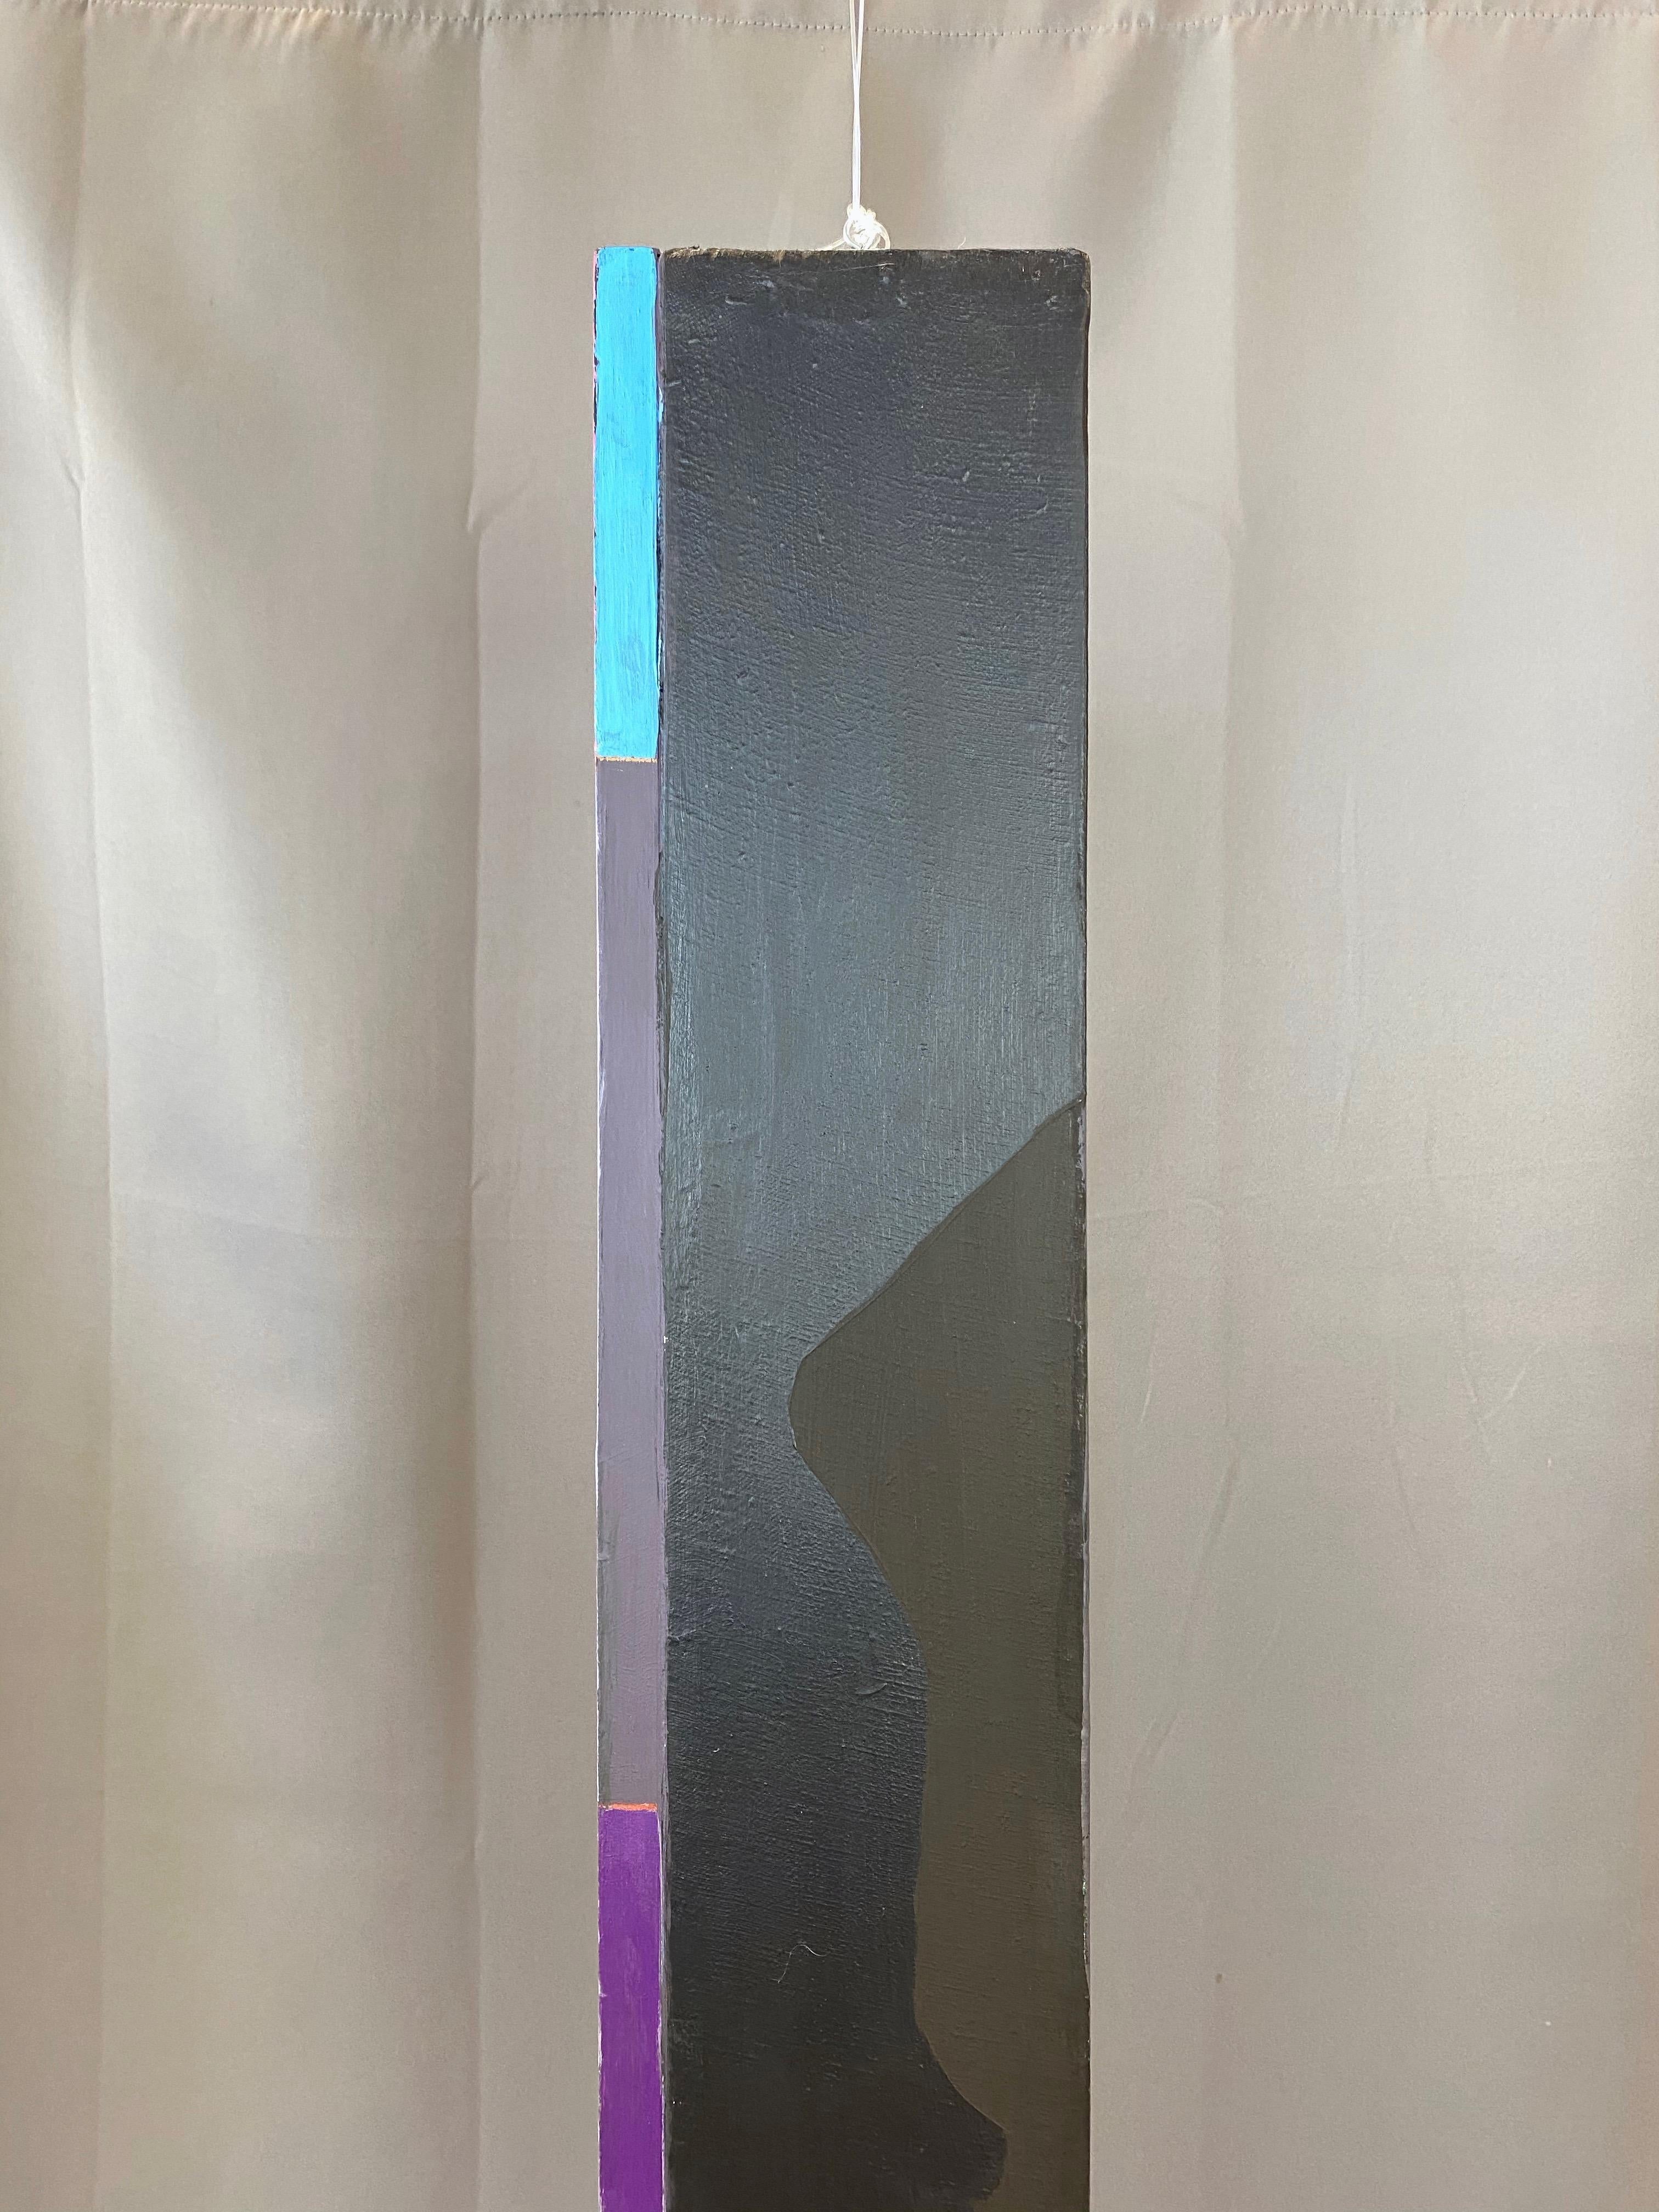 Robert English, Towering Abstract Memphis-Style Four-Sided Painting, 1980s For Sale 10